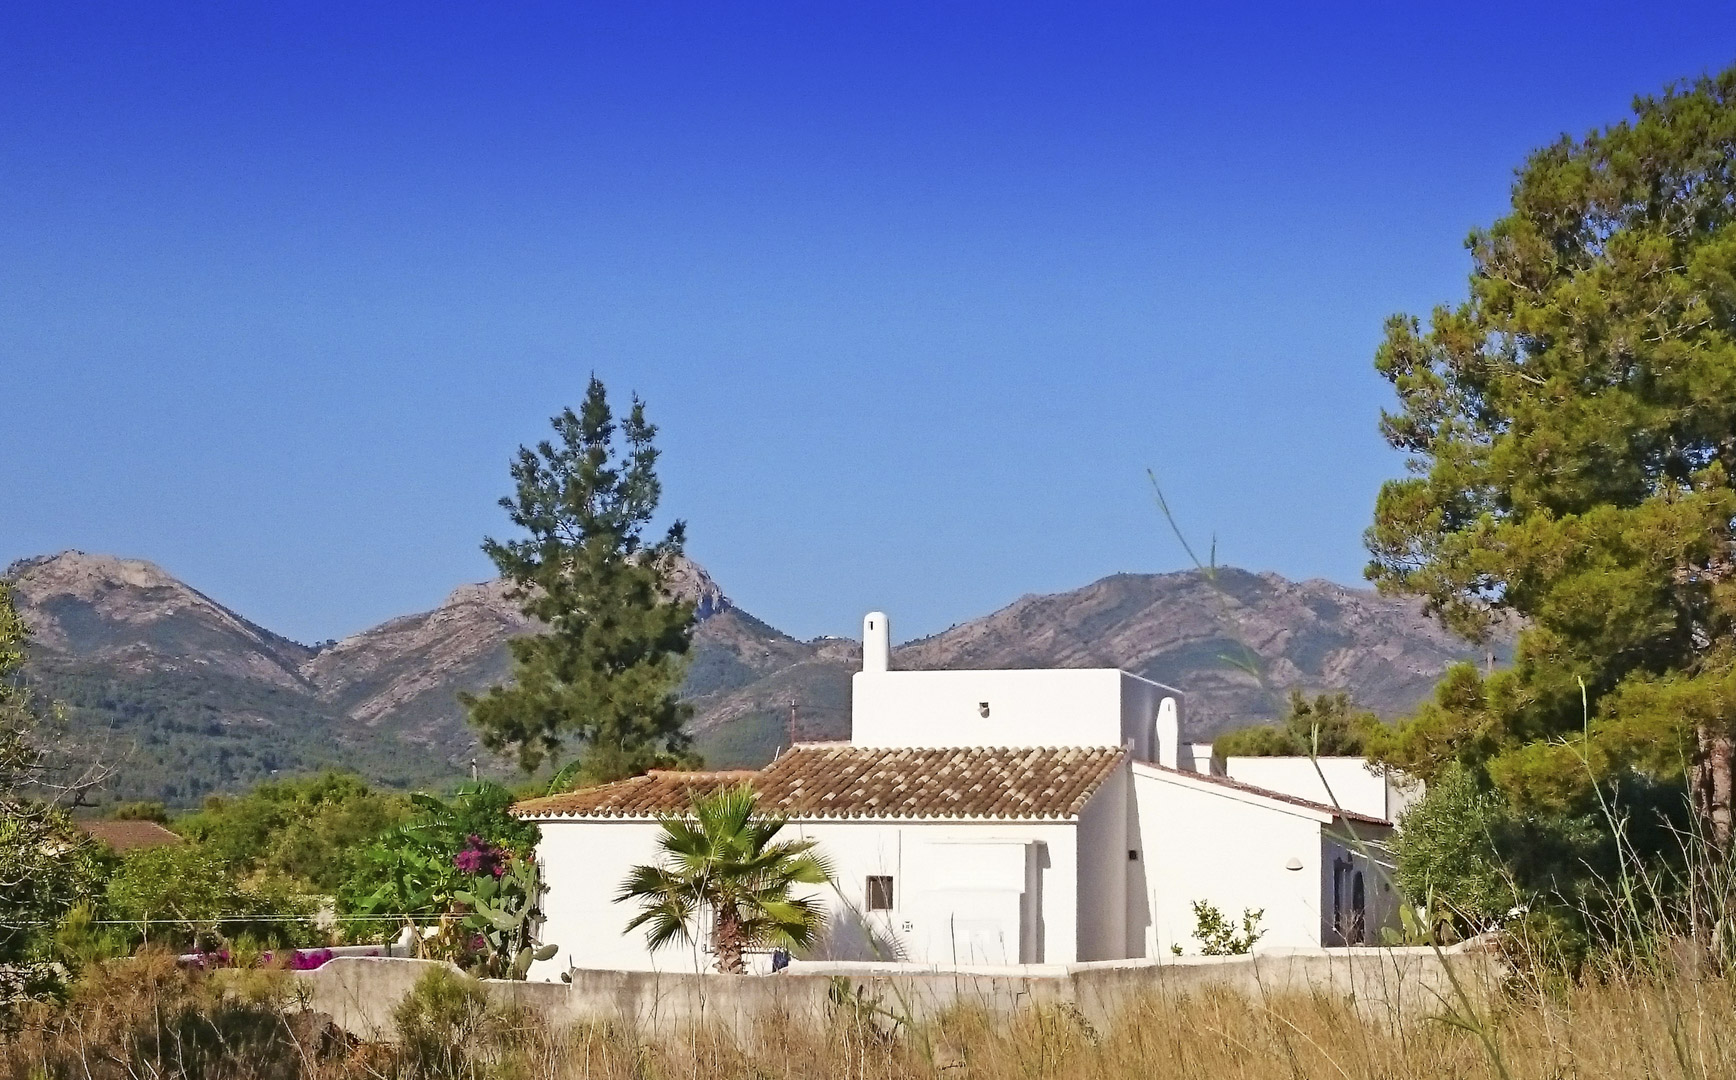 For sale: 4 bedroom house / villa in Jalon / Xaló